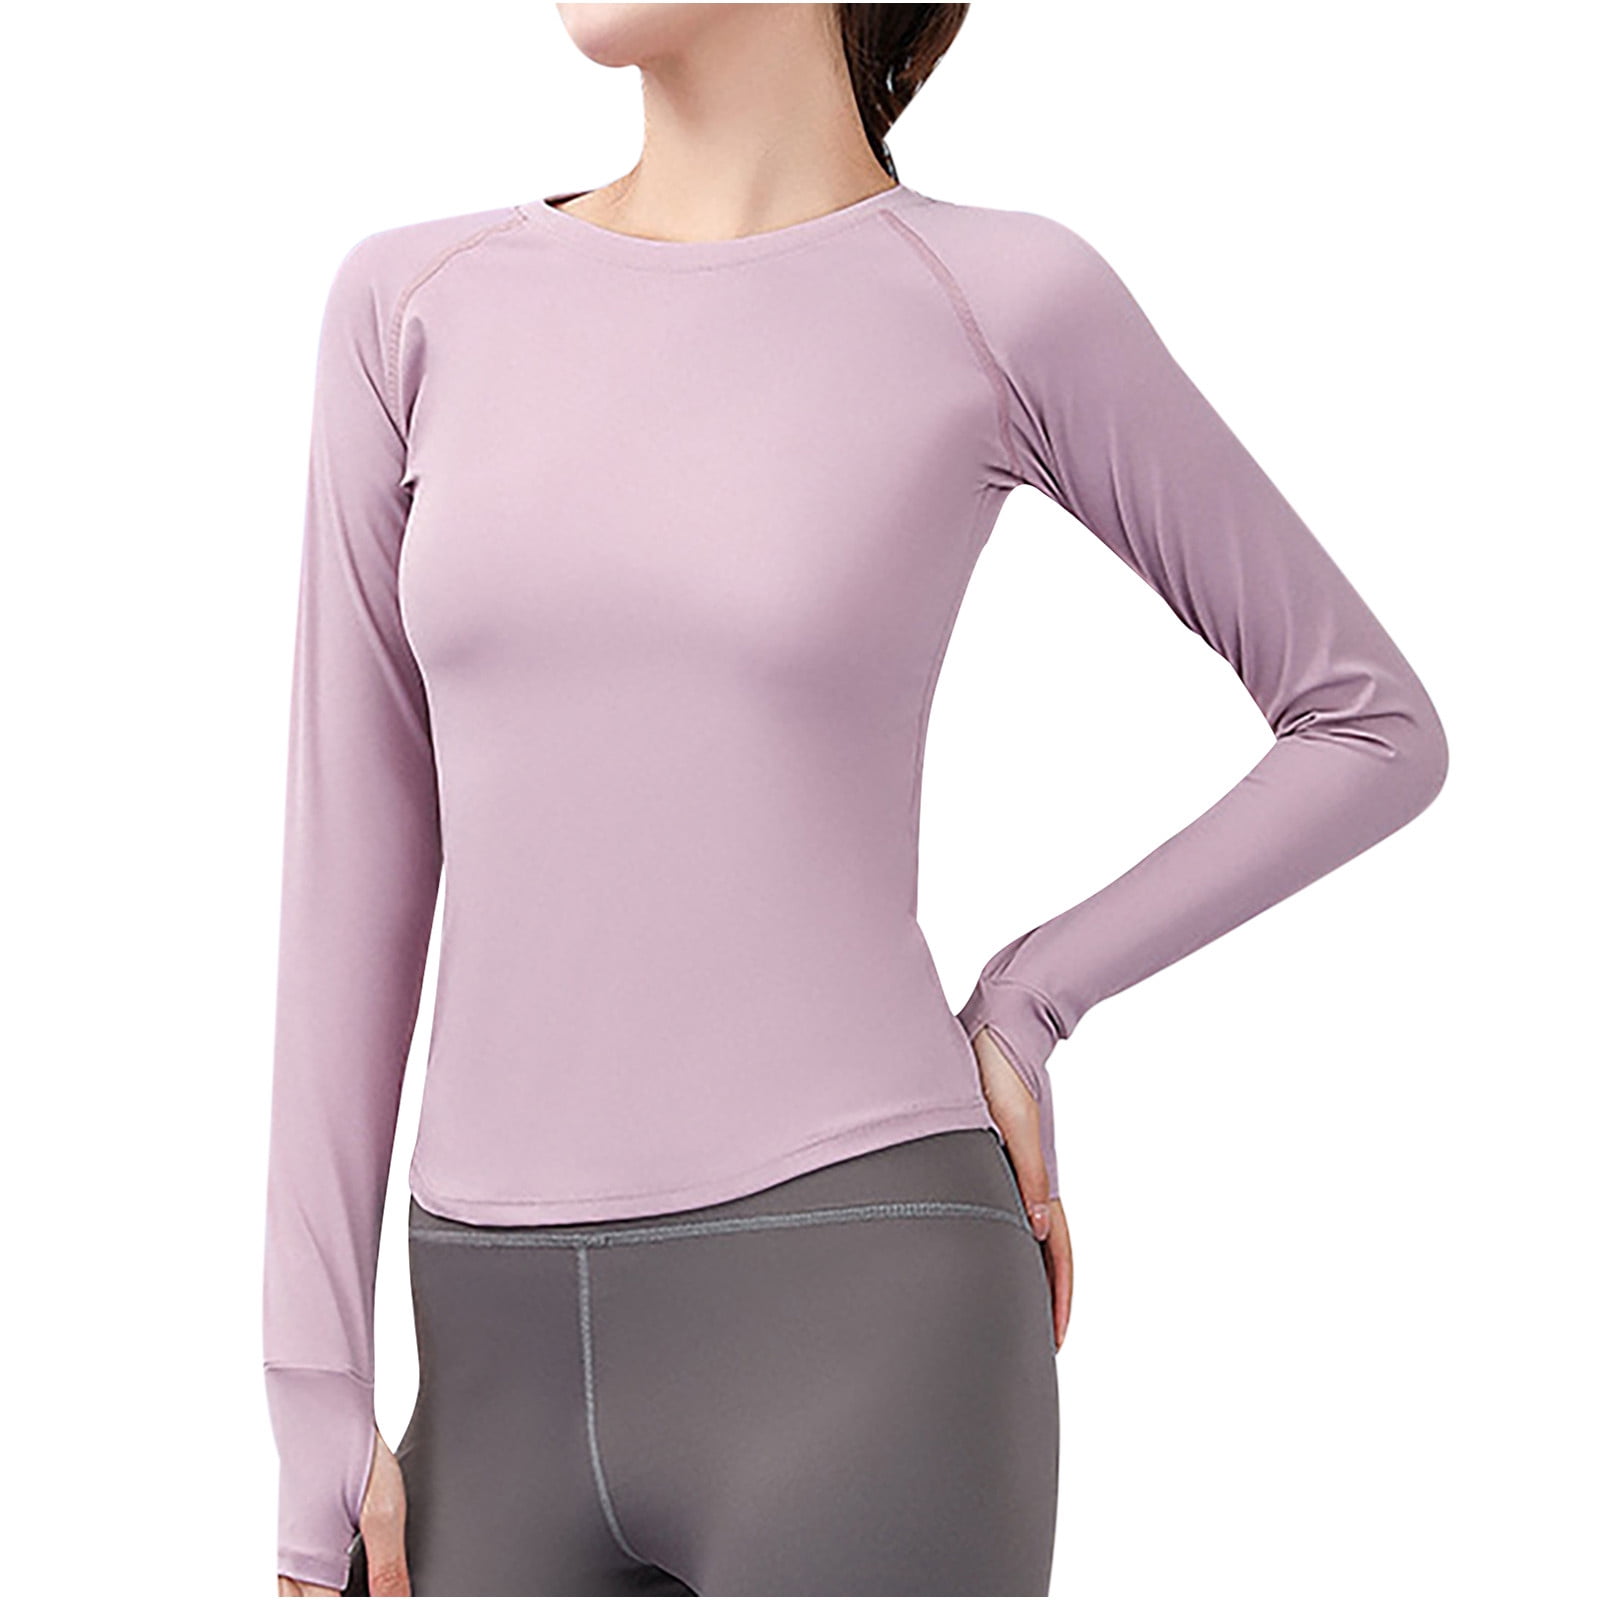 Hfyihgf Women's Long Sleeve Running Shirts with Thumbholes Stretch  Breathable Athletic Quick Dry Mesh Back Yoga Tops Workout T-Shirt(Purple,S)  